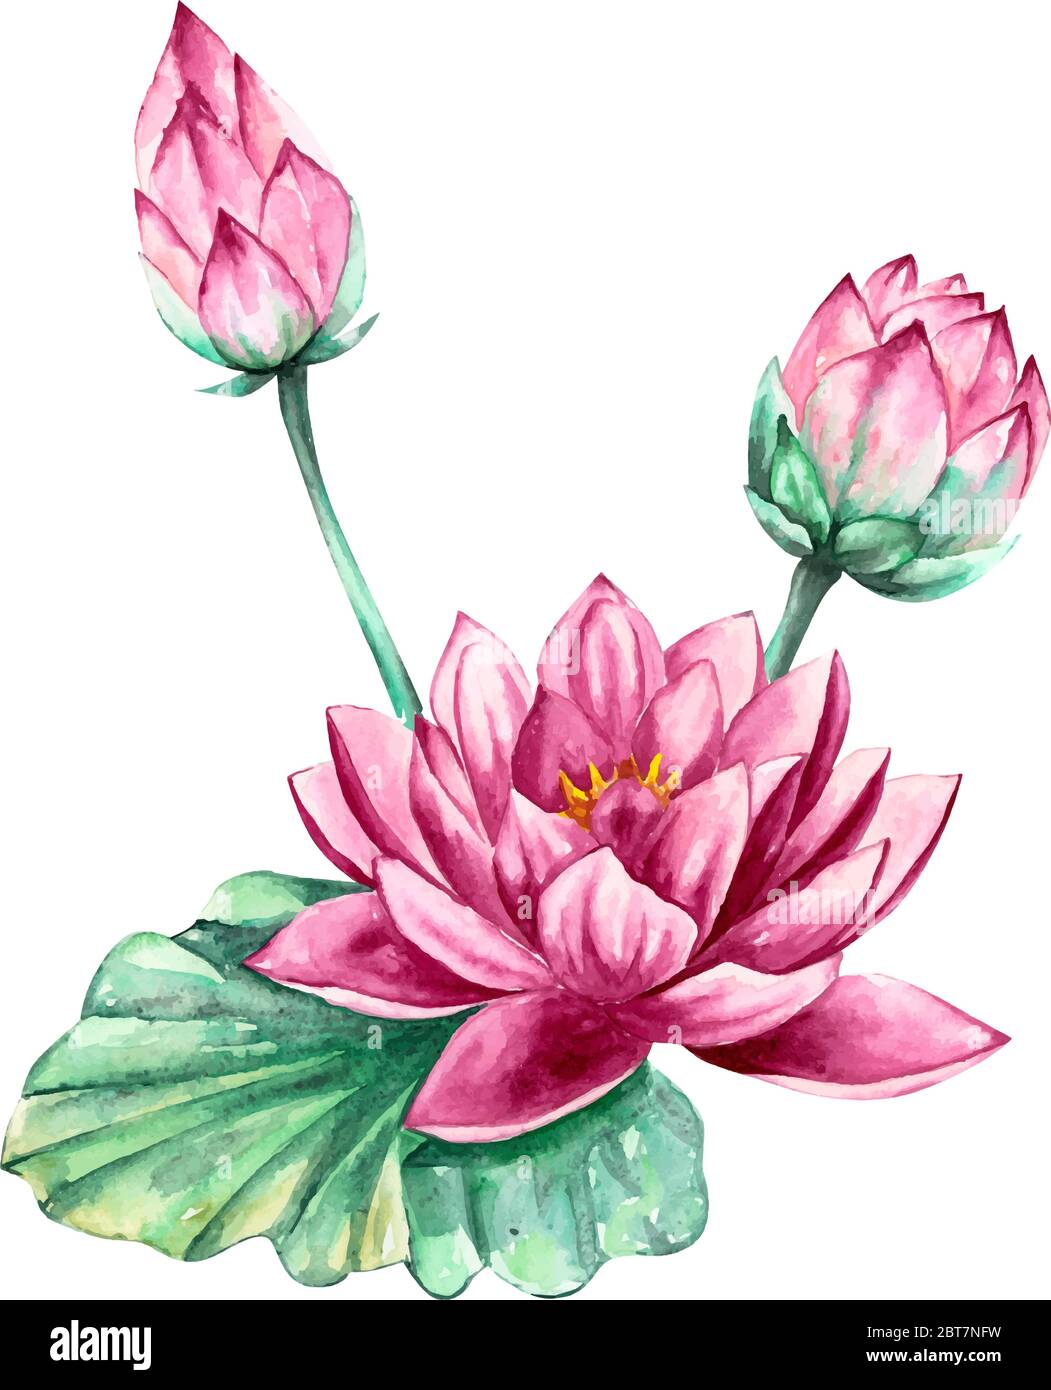 How to Draw a Water Lily flower (simplified for beginners) - YouTube